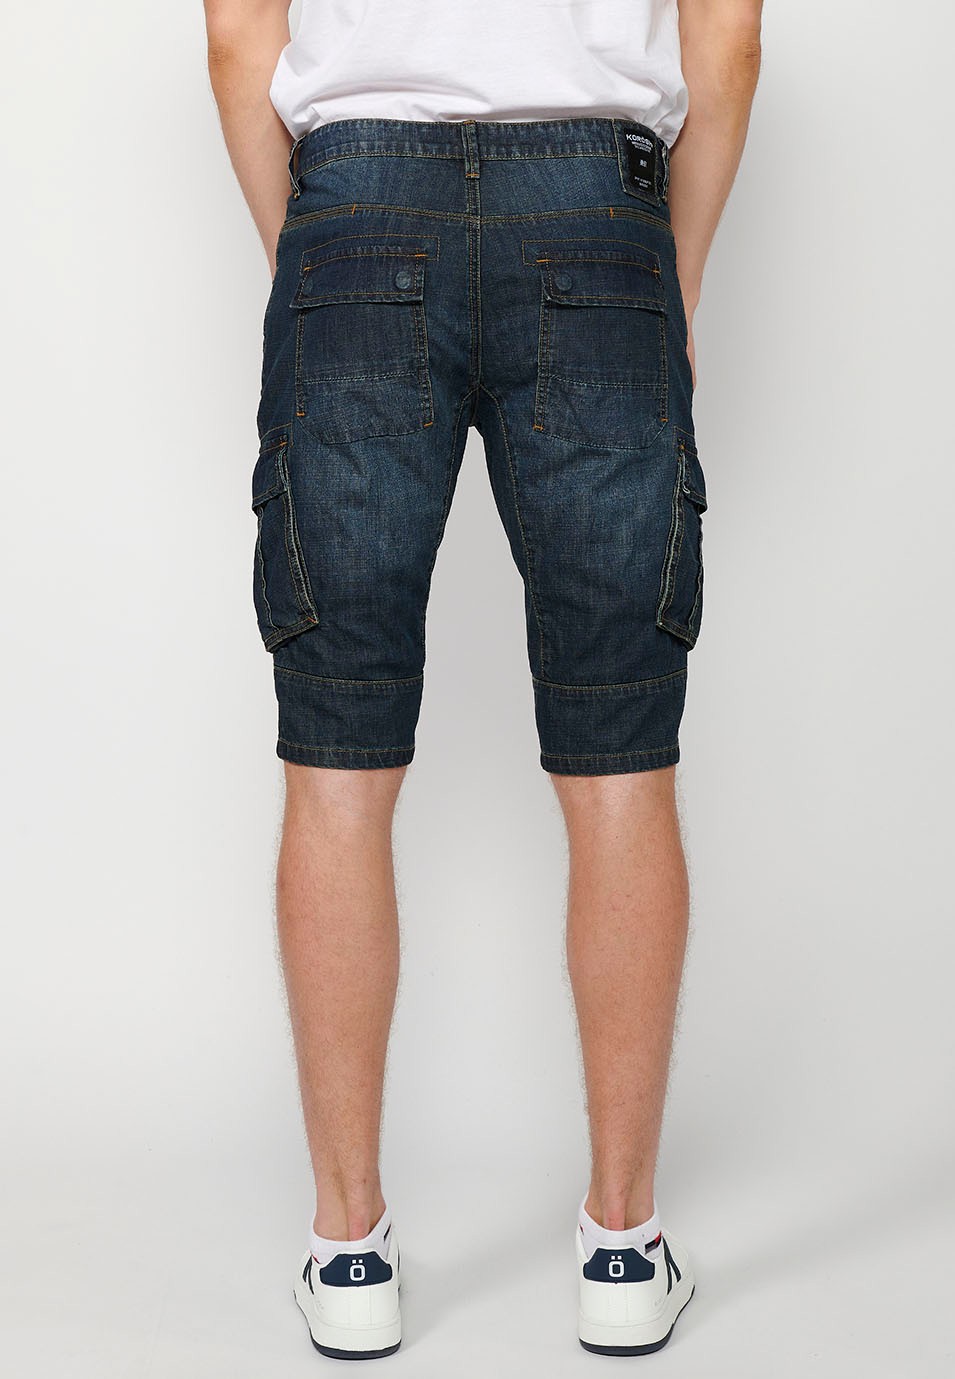 Cotton Pirate Denim Bermuda Shorts with Side Pockets and Front Closure with Zipper and Button in Blue for Men 3